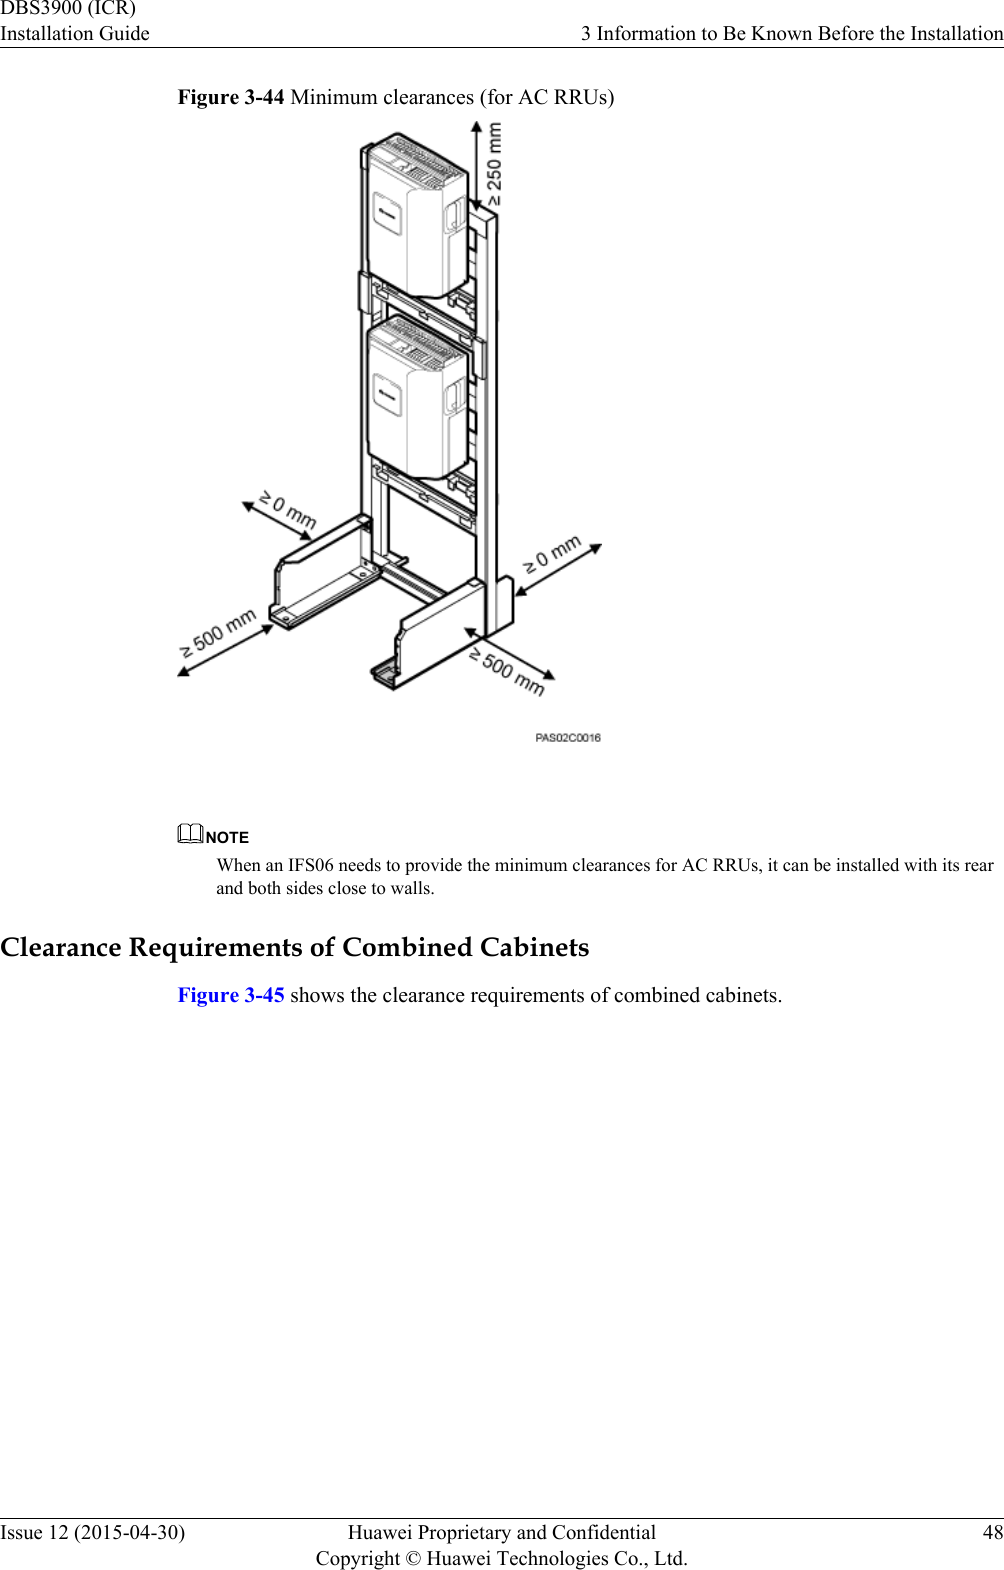 Figure 3-44 Minimum clearances (for AC RRUs) NOTEWhen an IFS06 needs to provide the minimum clearances for AC RRUs, it can be installed with its rearand both sides close to walls.Clearance Requirements of Combined CabinetsFigure 3-45 shows the clearance requirements of combined cabinets.DBS3900 (ICR)Installation Guide 3 Information to Be Known Before the InstallationIssue 12 (2015-04-30) Huawei Proprietary and ConfidentialCopyright © Huawei Technologies Co., Ltd.48